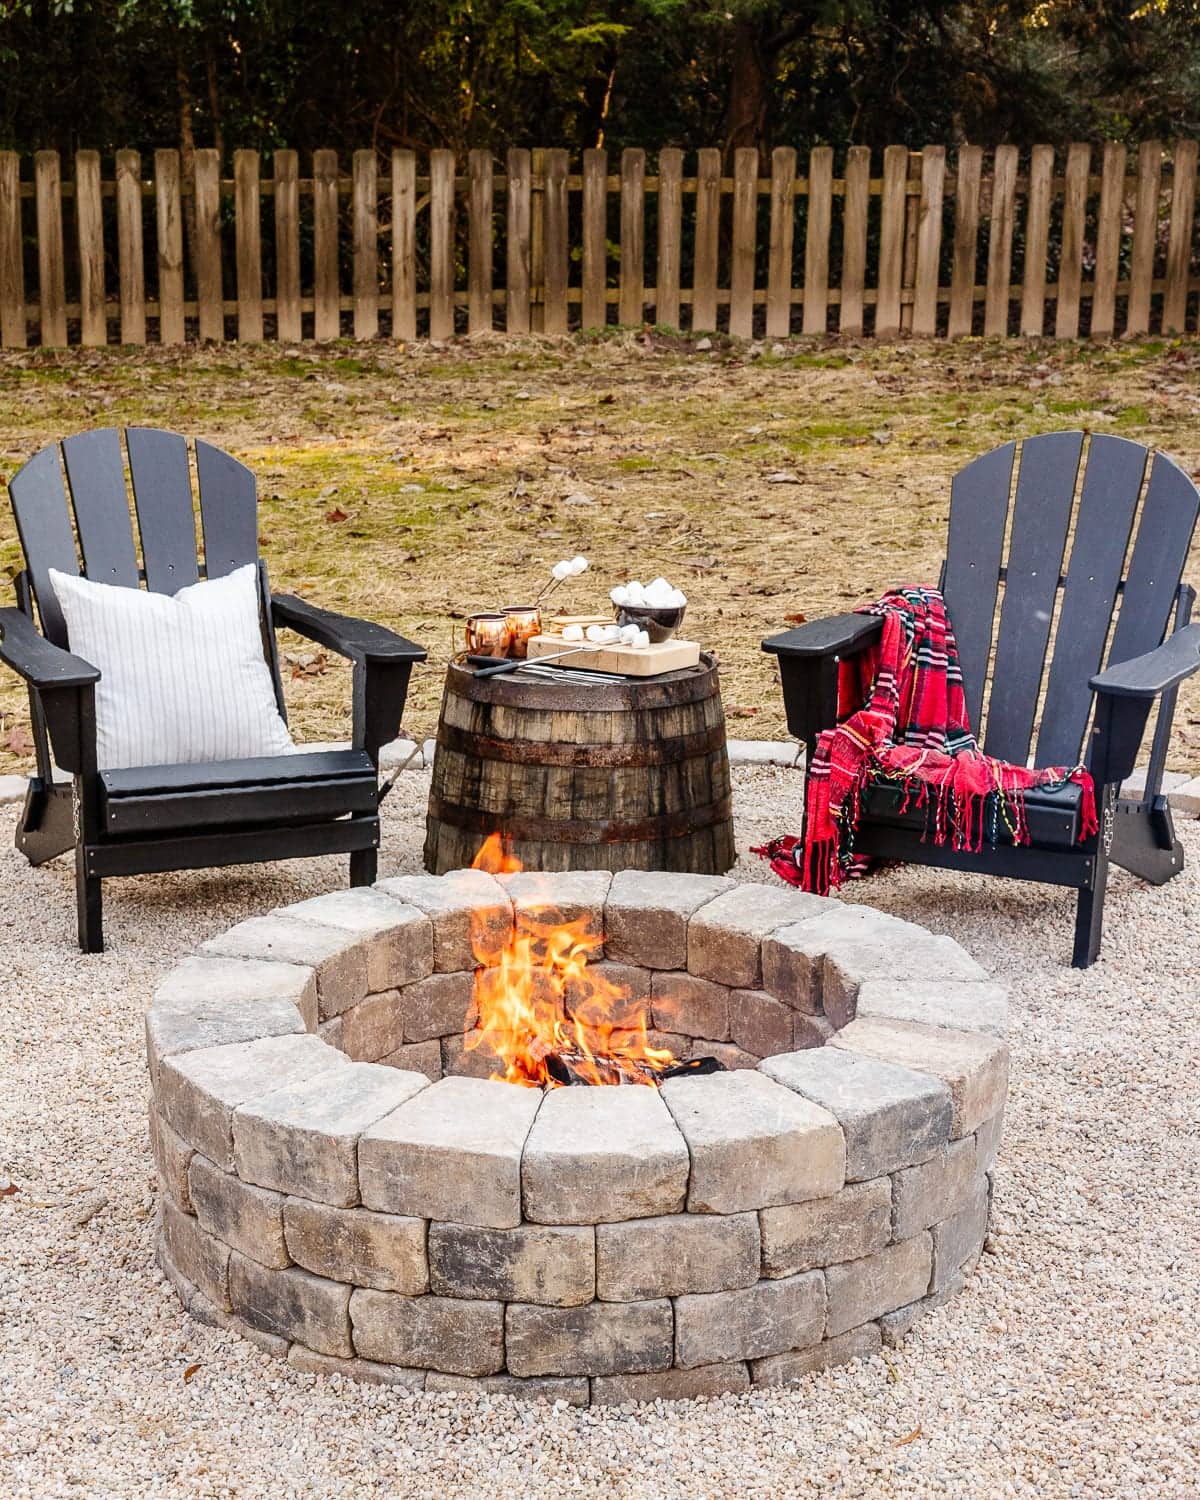 DIY fire pit with stone and pea gravel surrounded by adirondack chairs